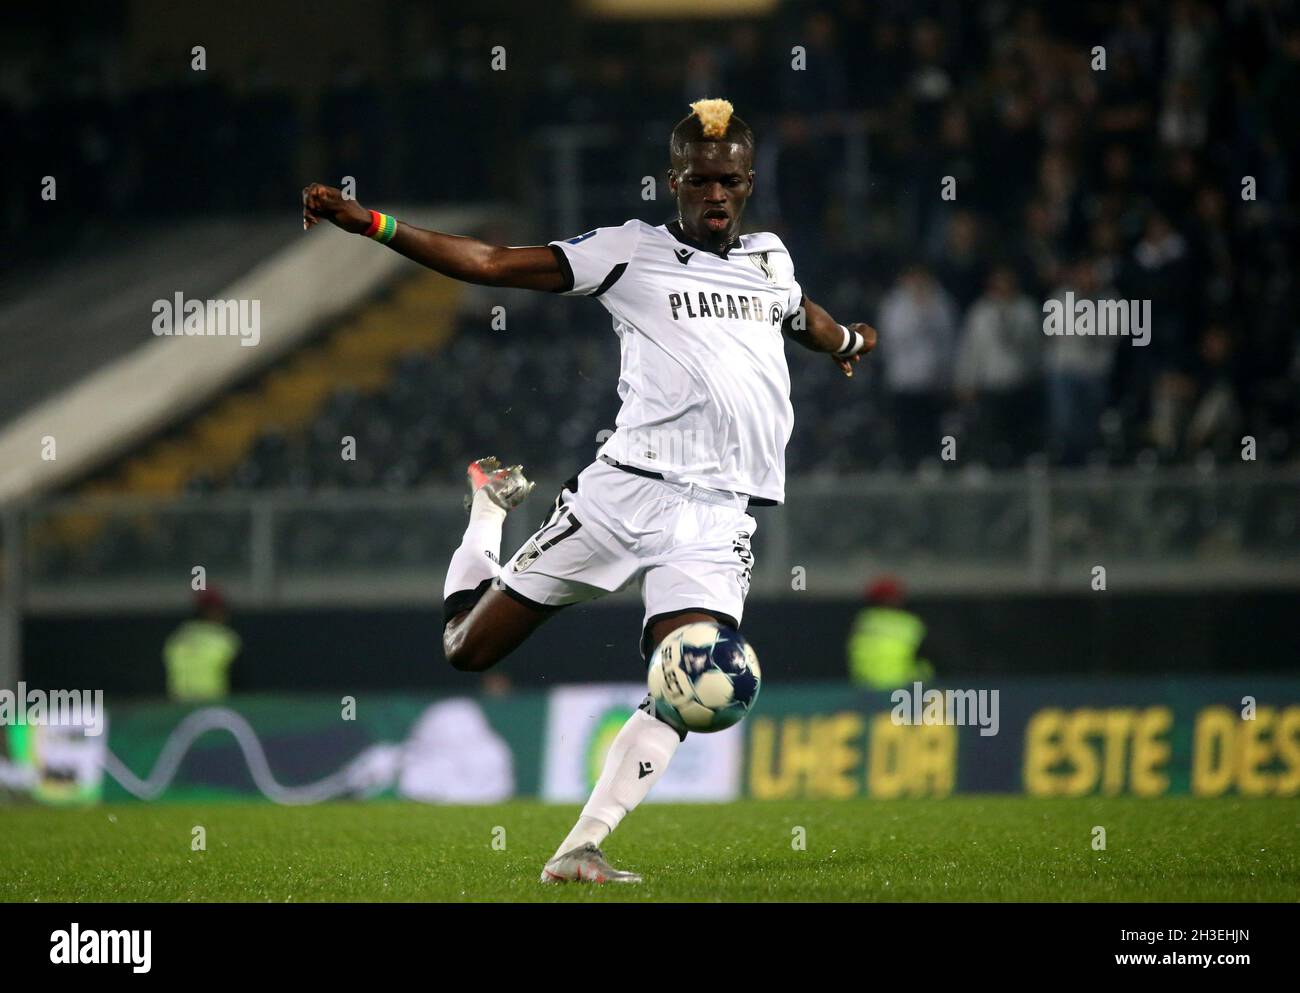 GUIMARAES, PORTUGAL - OCTOBER 27: Falaye Sacko of Vitoria Sc in action ,during the Portugal Allianz Cup match between Vitoria SC and Benfica SL at Estadio Dom Afonso Henriques on October 27, 2021 in Guimaraes, Portugal. (Photo by MB Media) Stock Photo